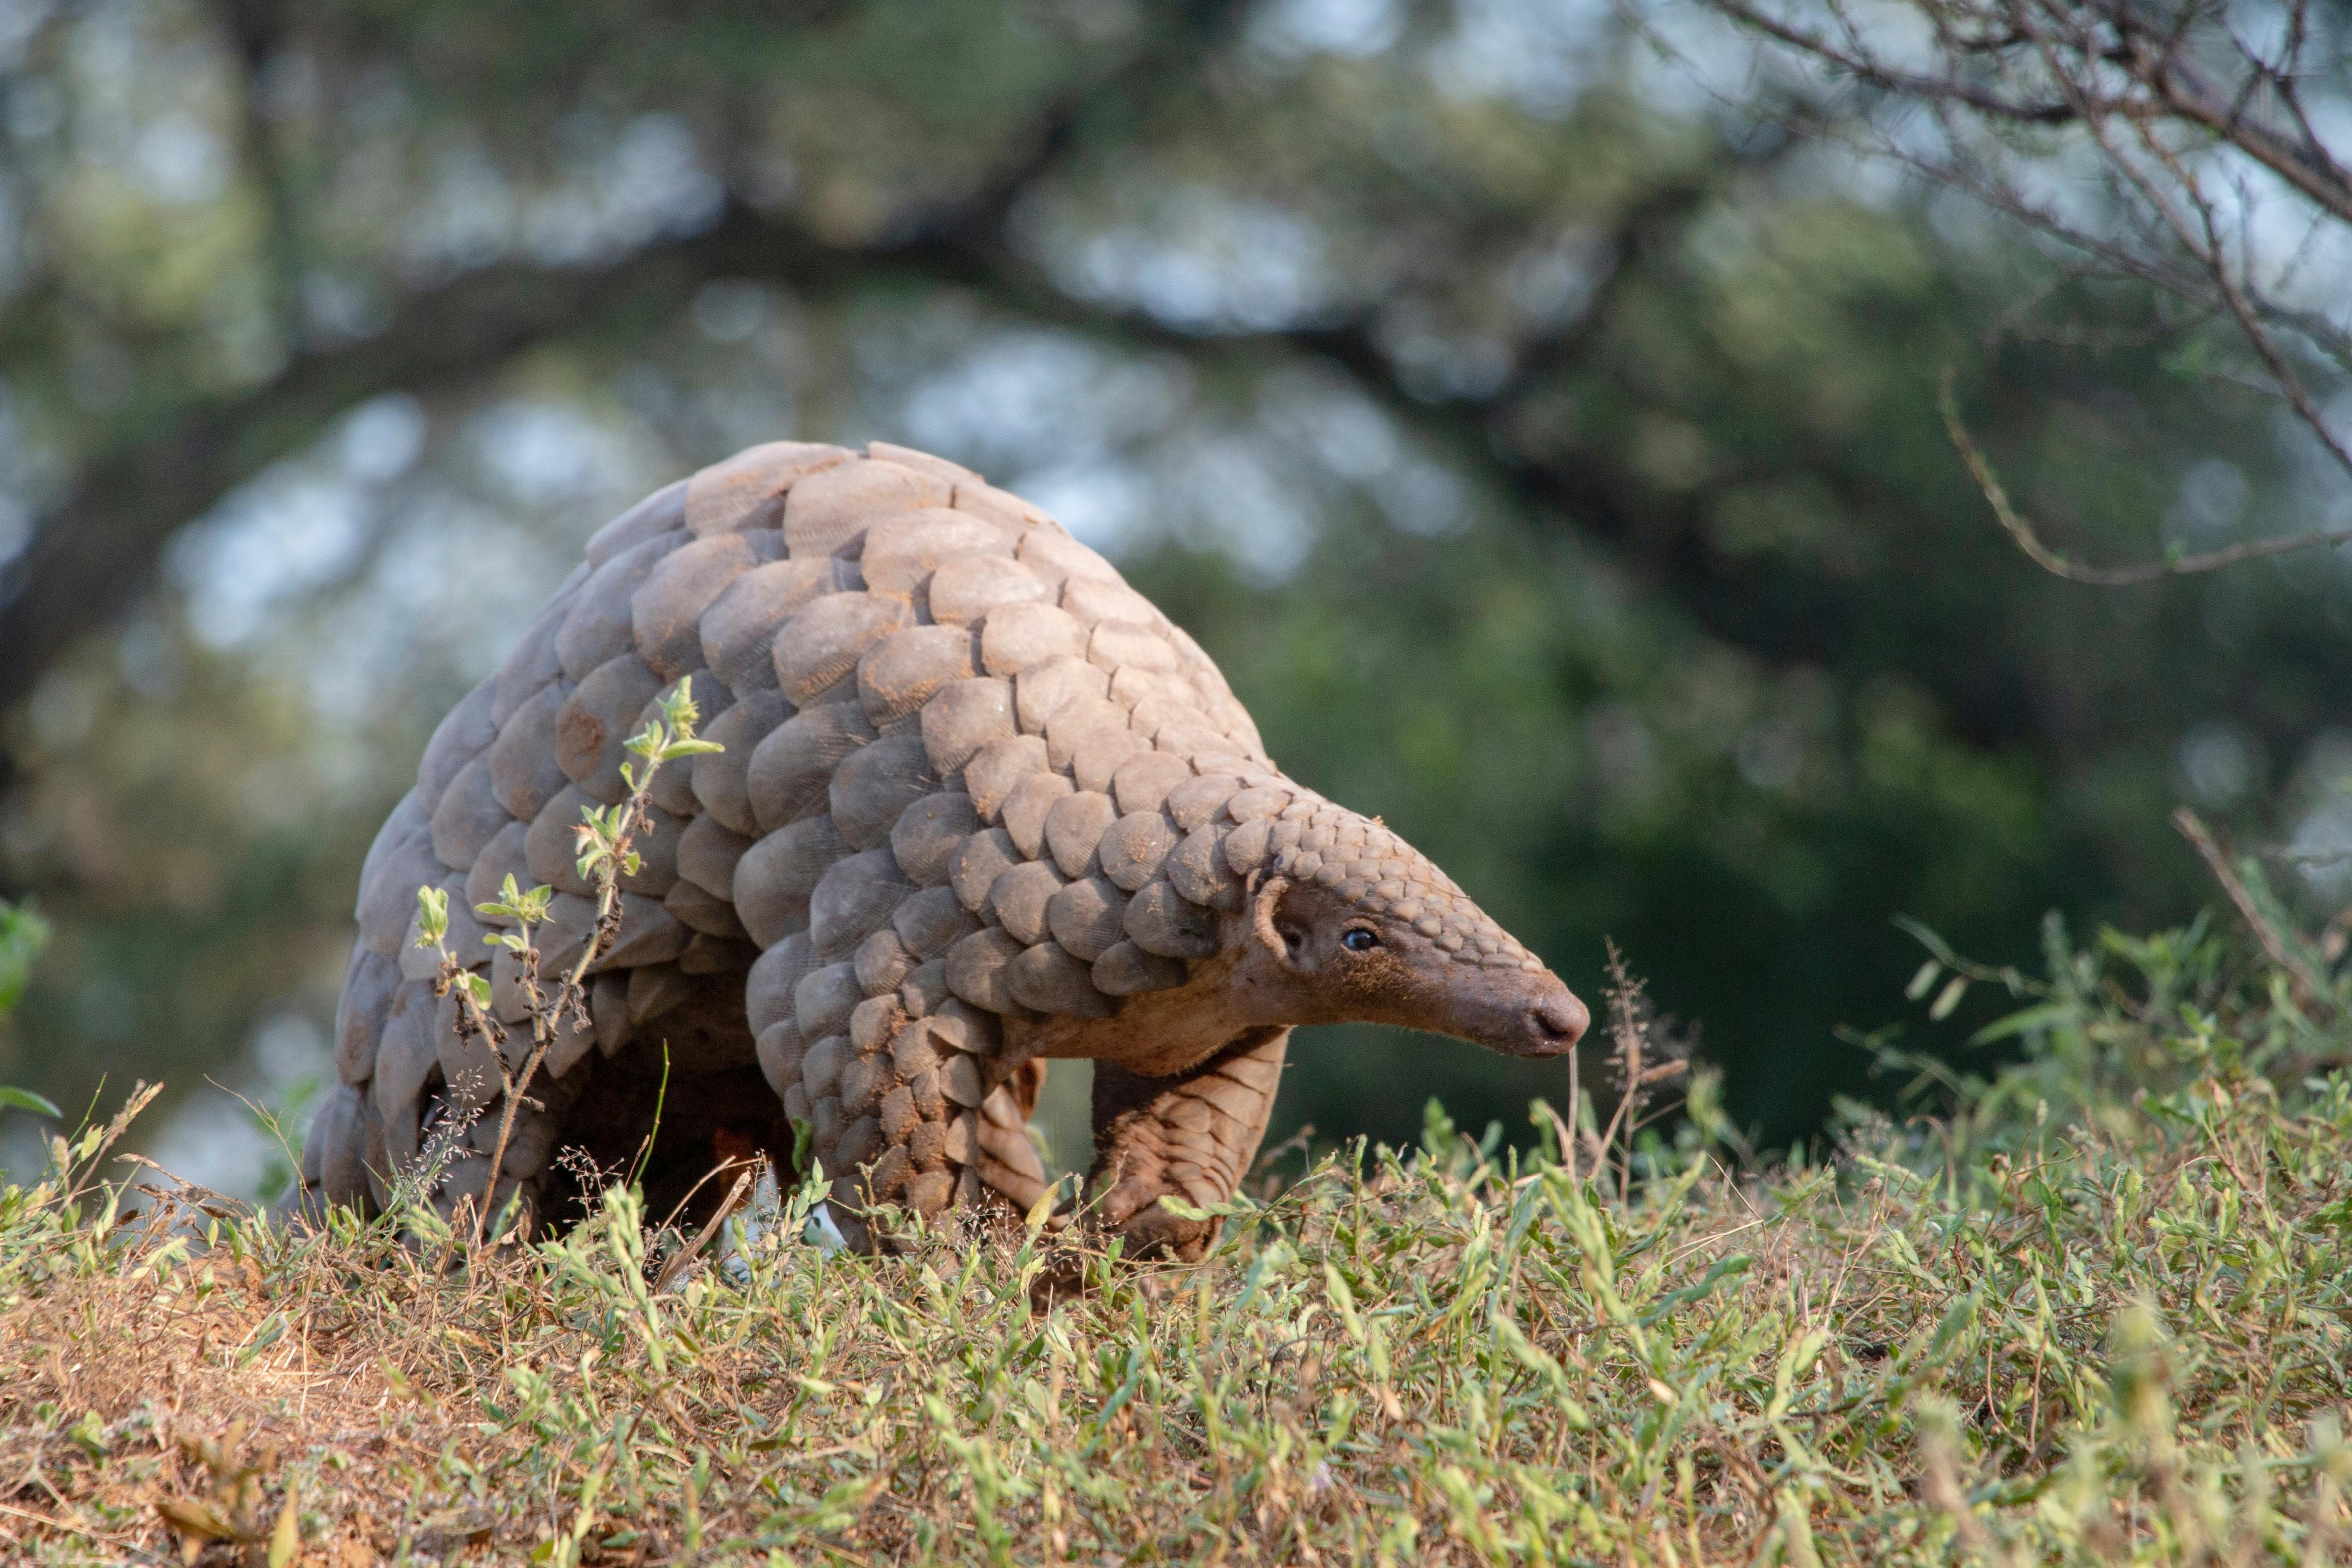 Disaster Relief for Communities and Pangolins